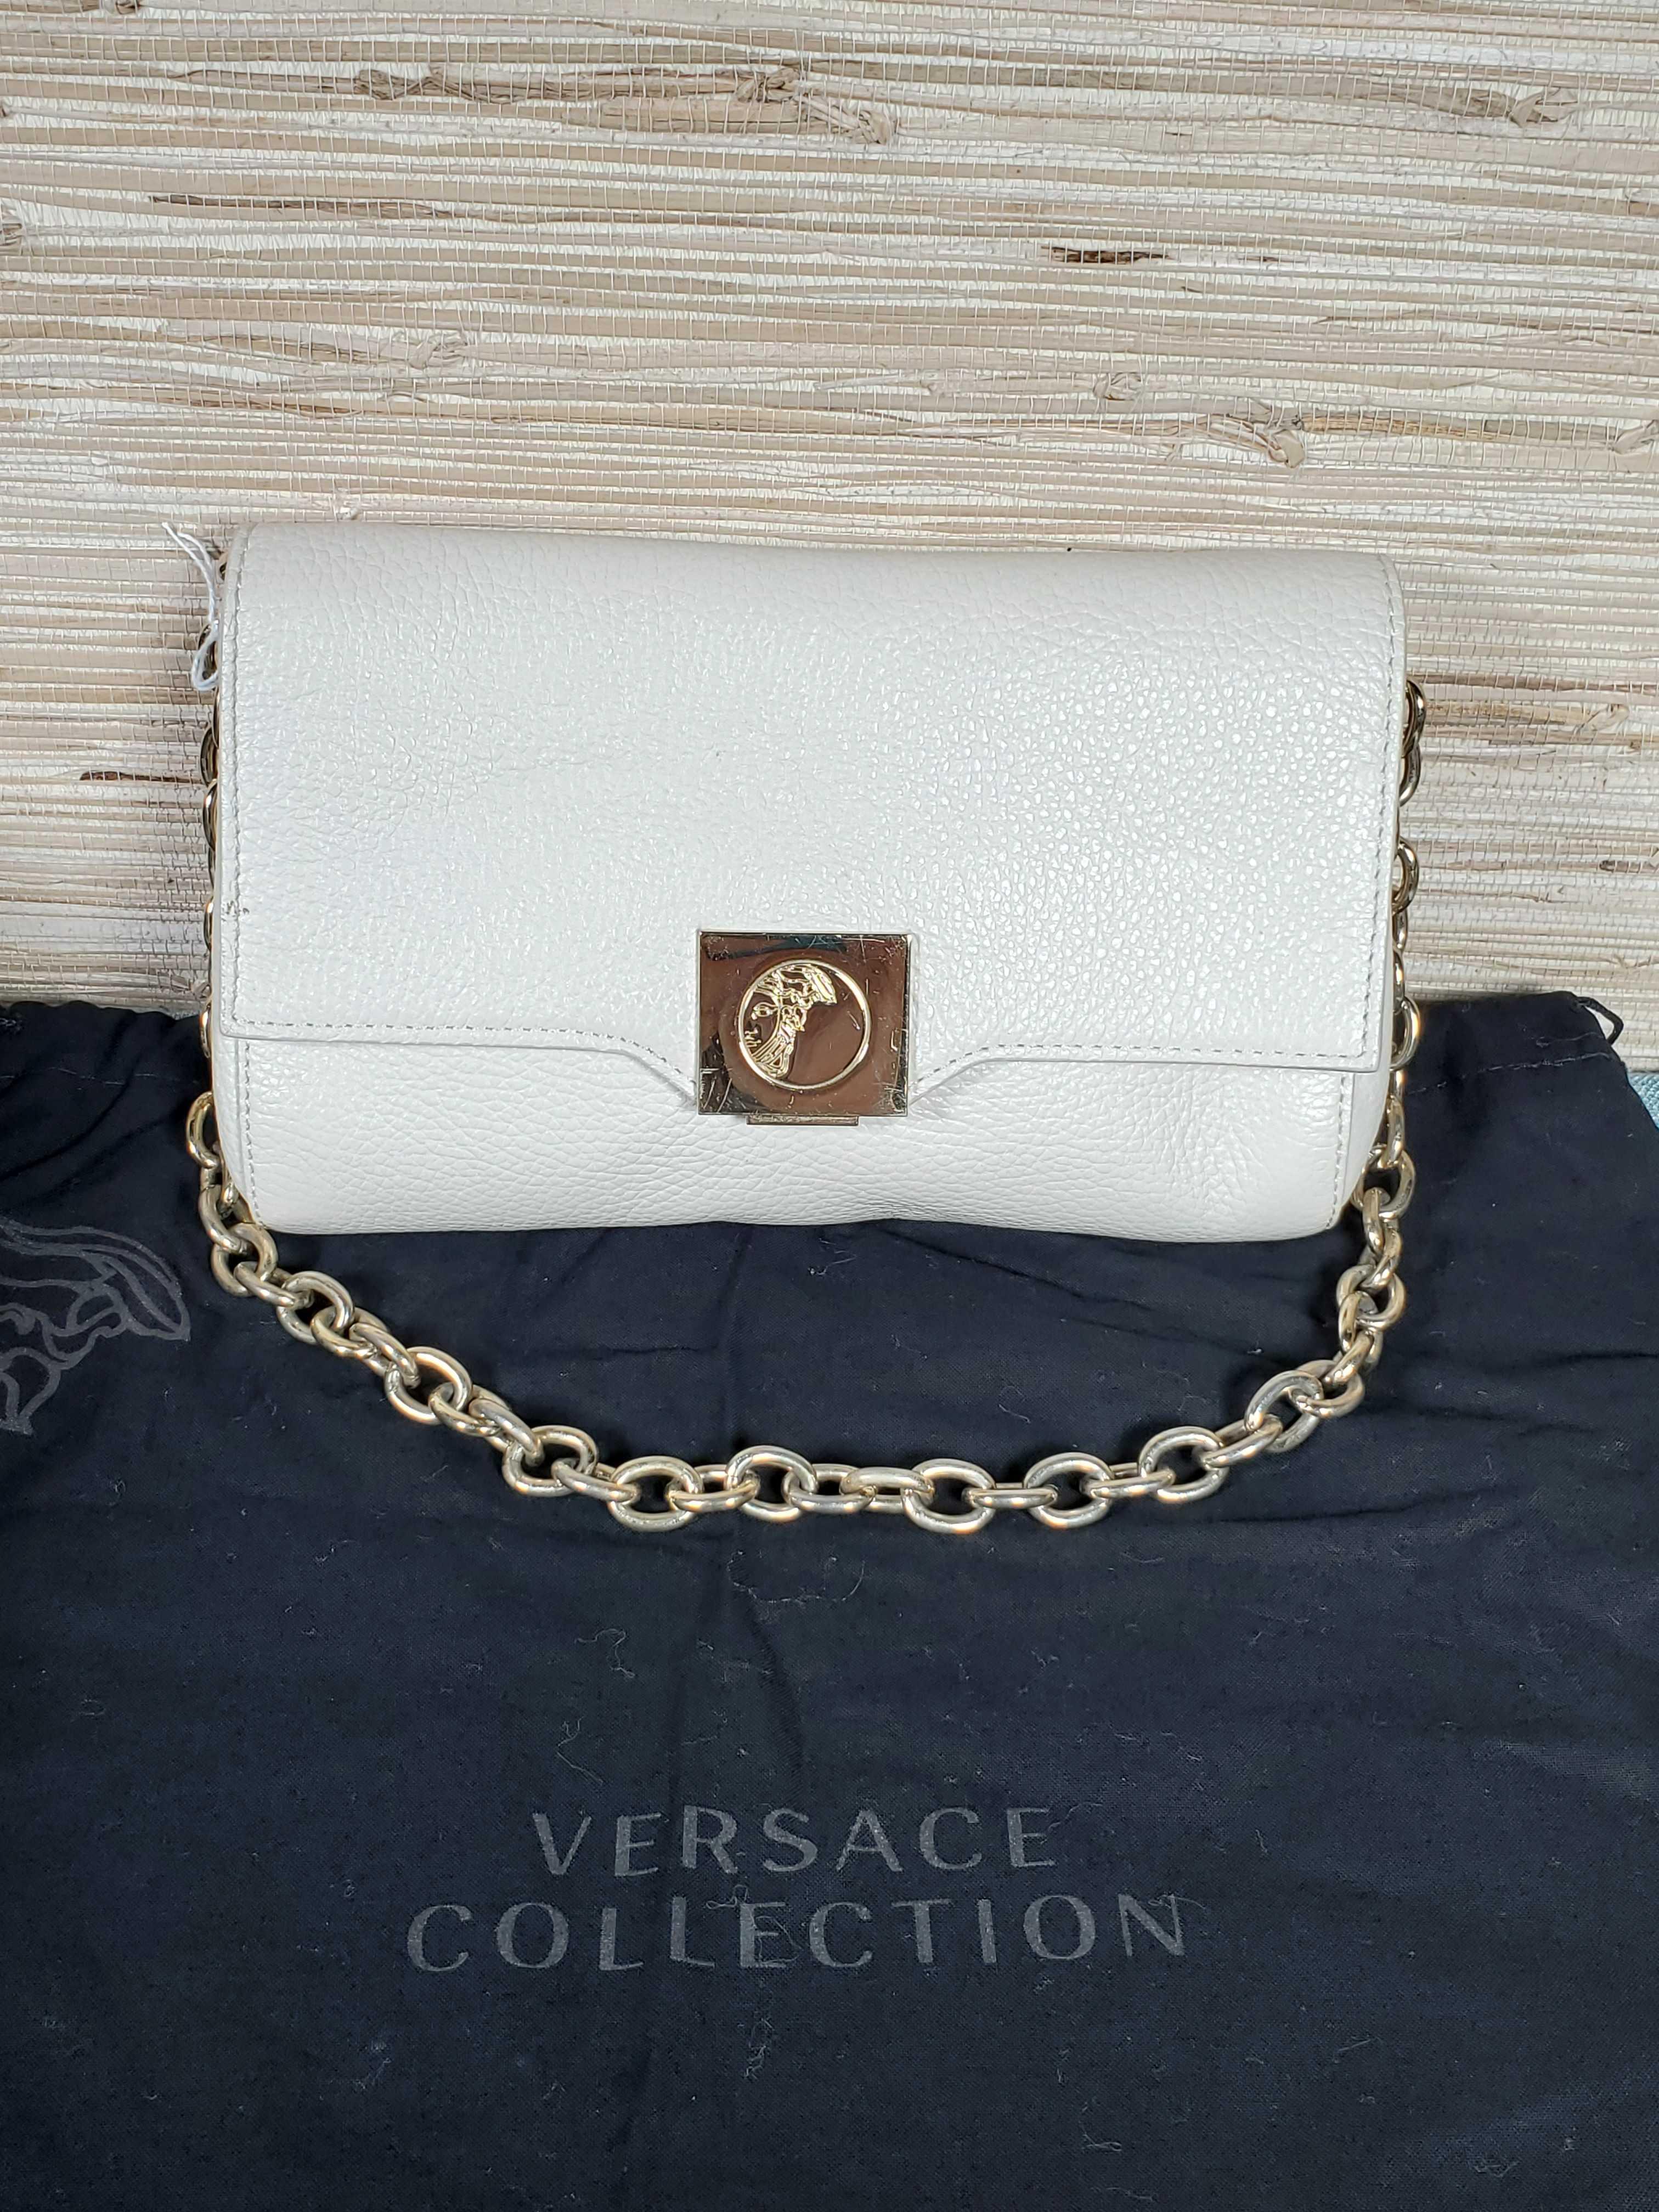 Authentic Pre-Owned Versace Leather Shoulder Bag / Wristlet with Coa